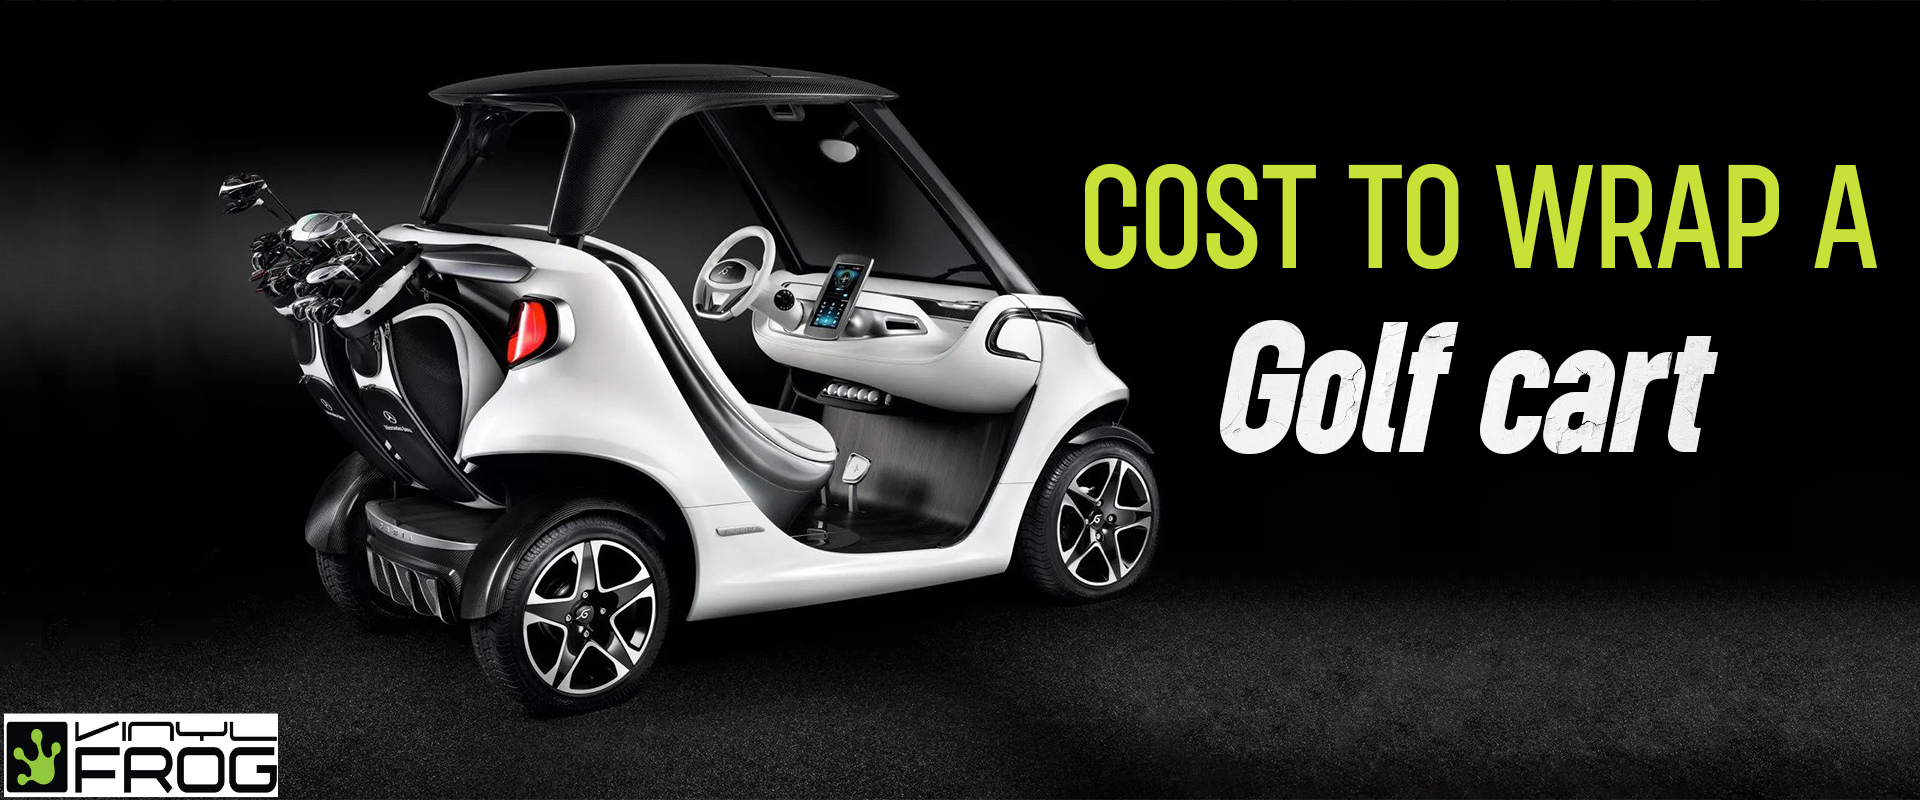 How Much Does It Cost To Wrap A Golf Cart?